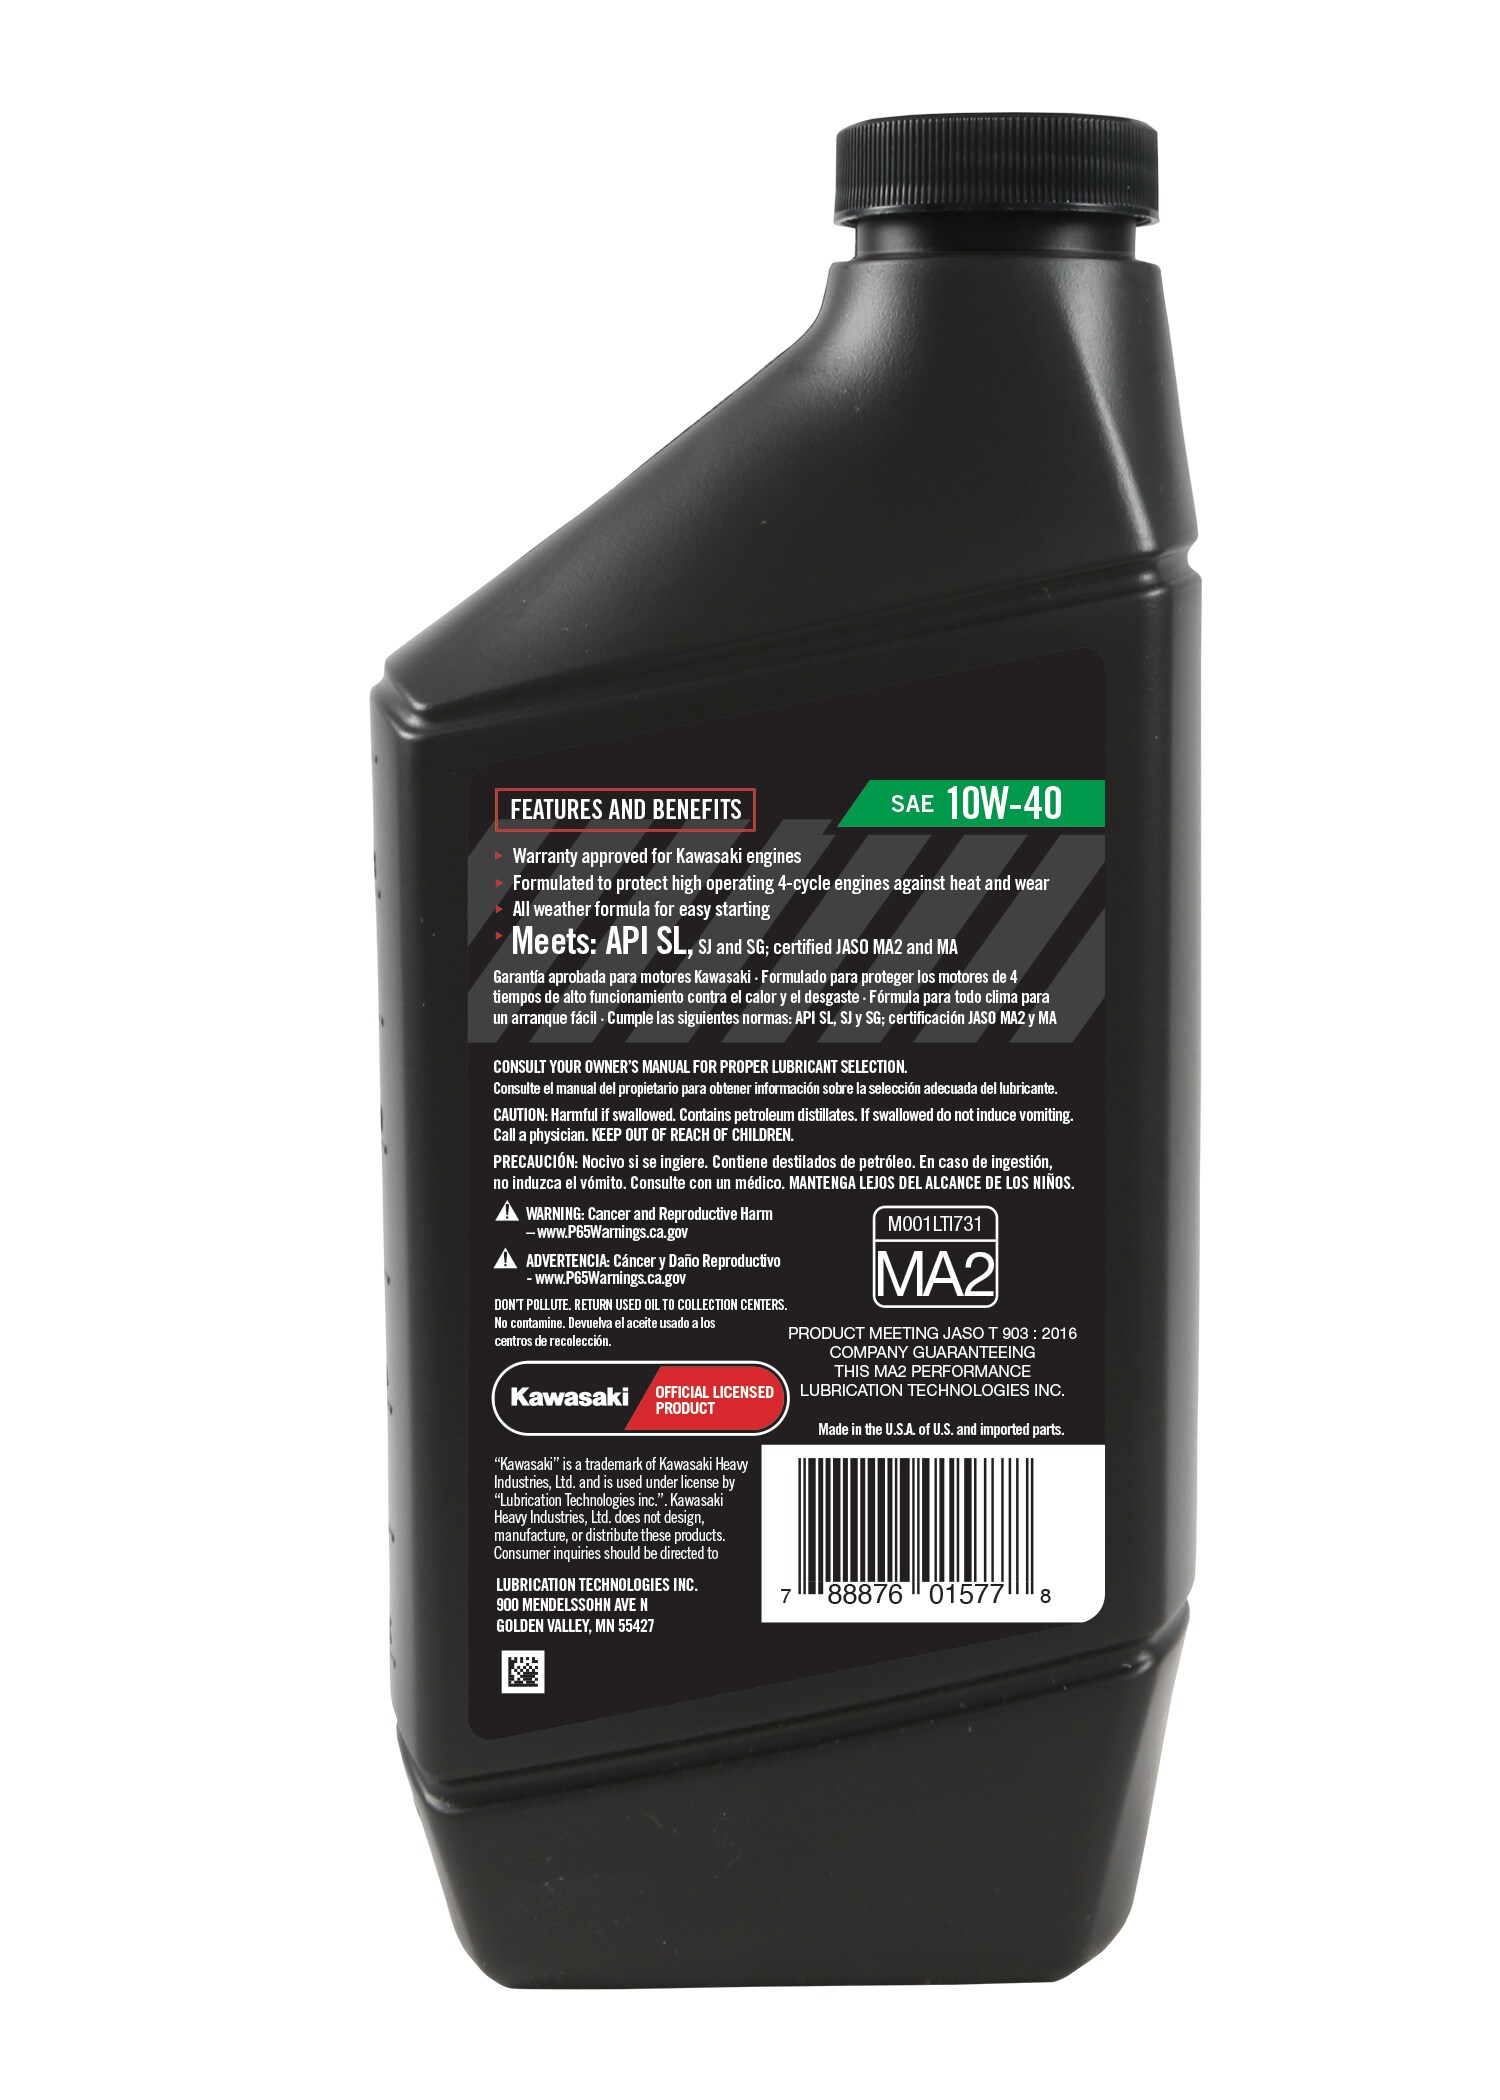 Kawasaki 32-oz 4-cycle Engines 10w-40 Synthetic Blend Engine Oil